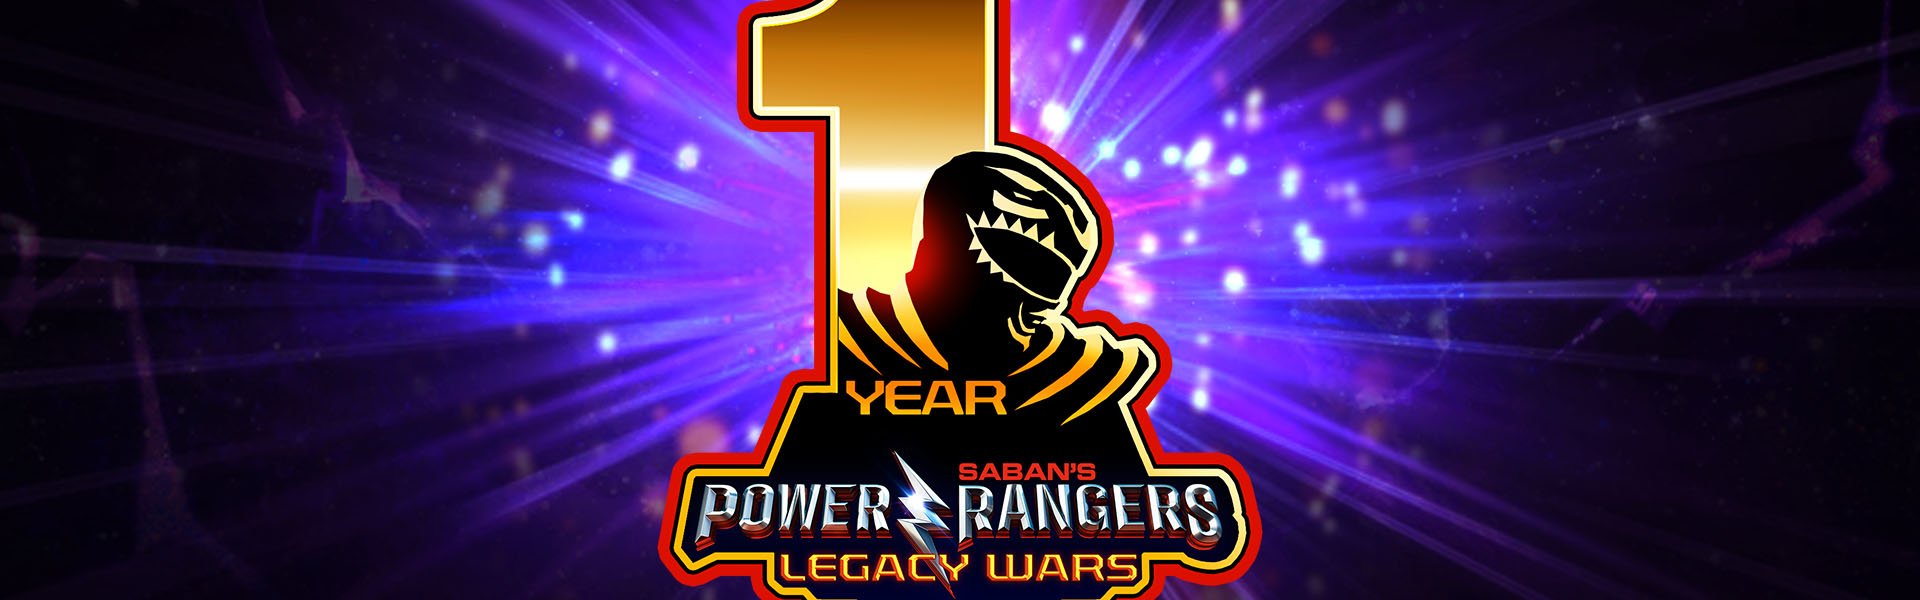 nWay Celebrates First Anniversary of Power Rangers: Legacy Wars 12